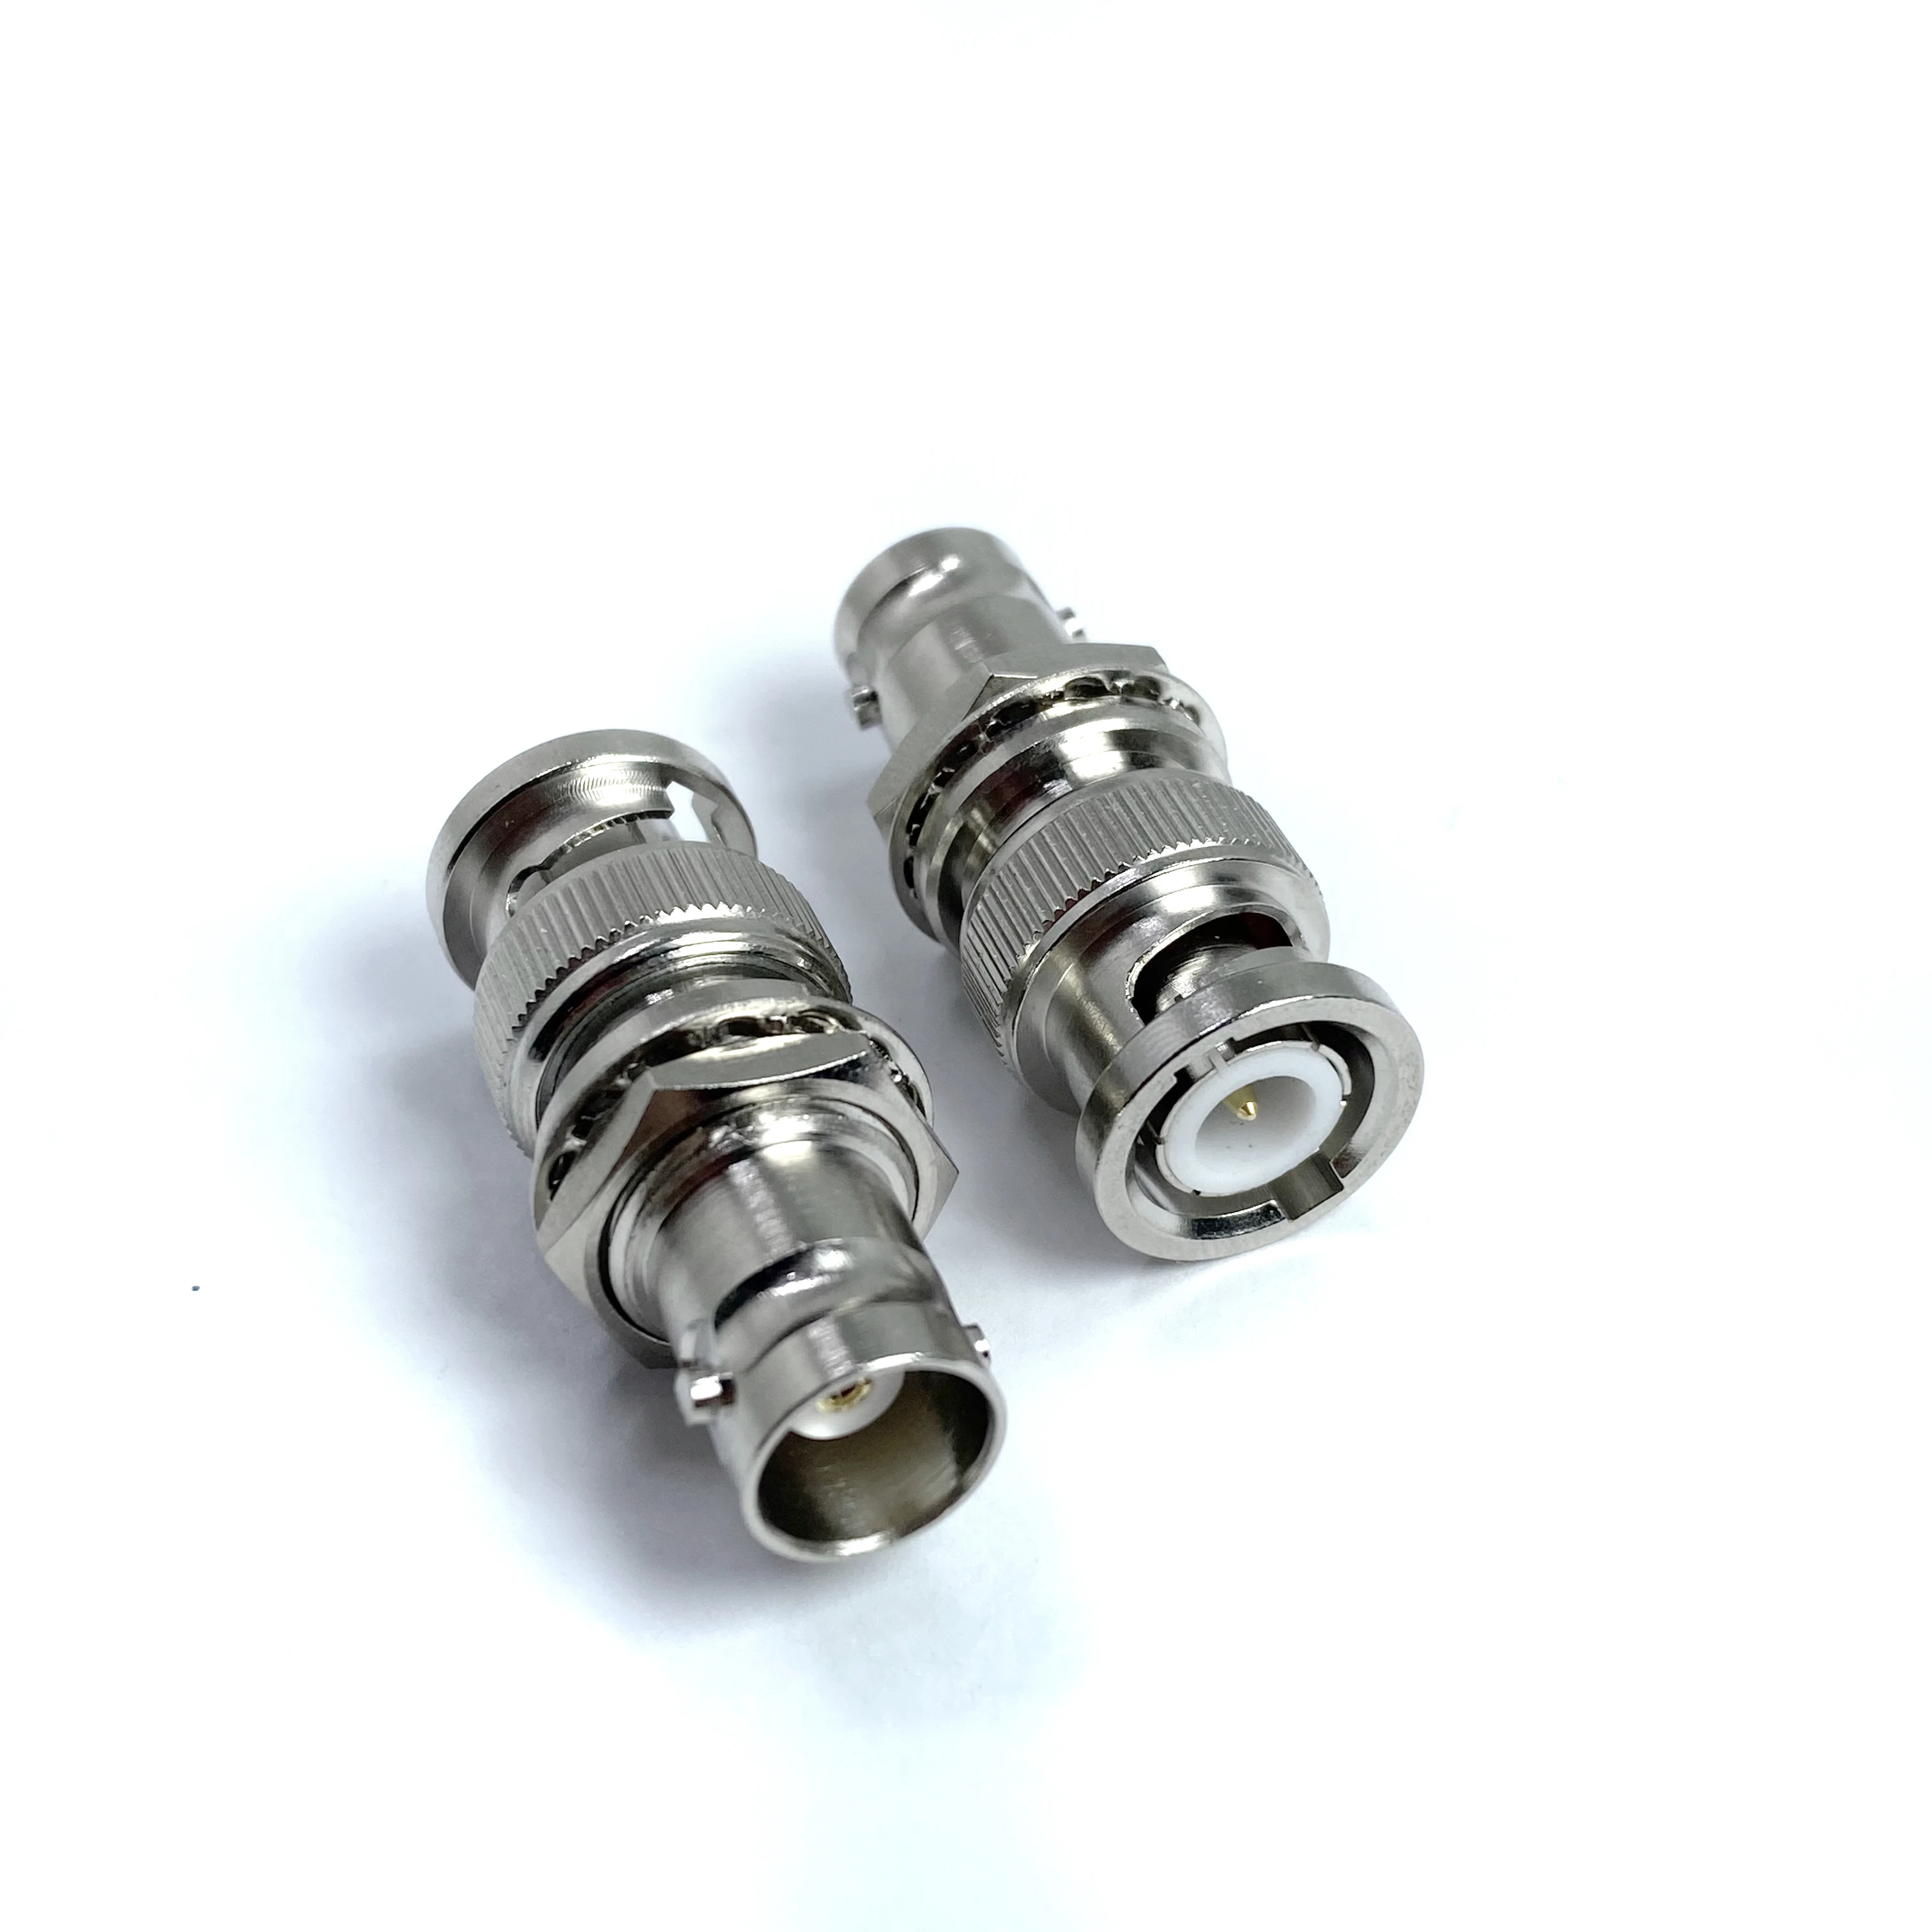 10-32 M5 Male Plug to BNC Female Connector Jack Adapter Radio Adapter Coaxial Connector details